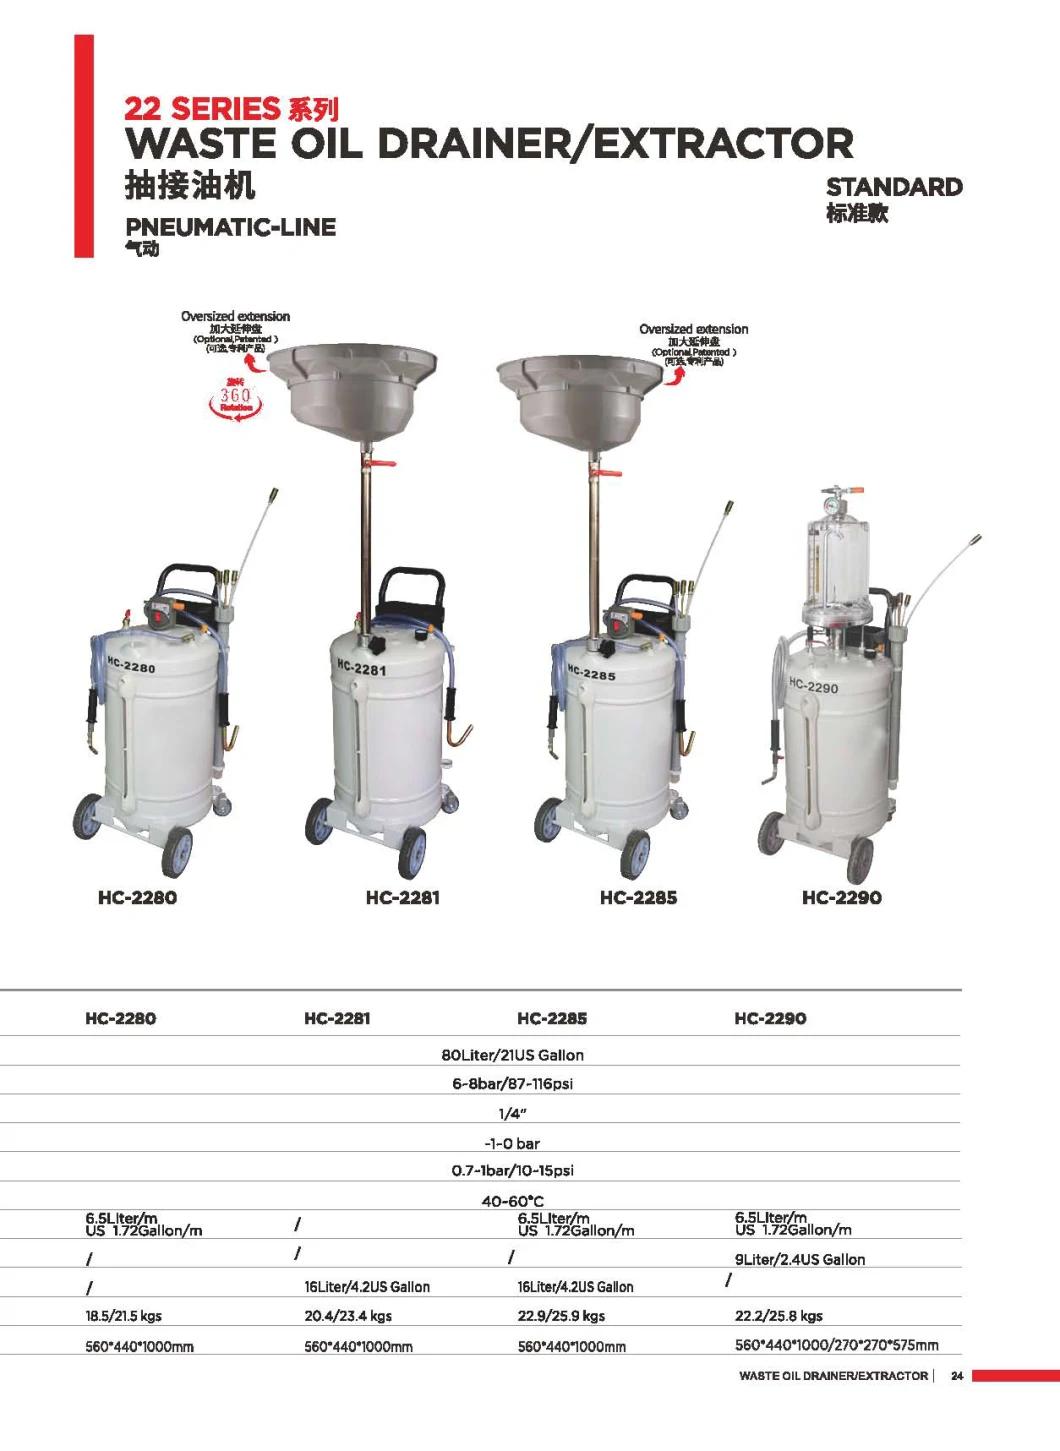 Waste Oil Drainer & Extractor Oil Extractor Hc-2290 Pneumatic Oil Extractor Oil Drainer Waste Oil Extractor